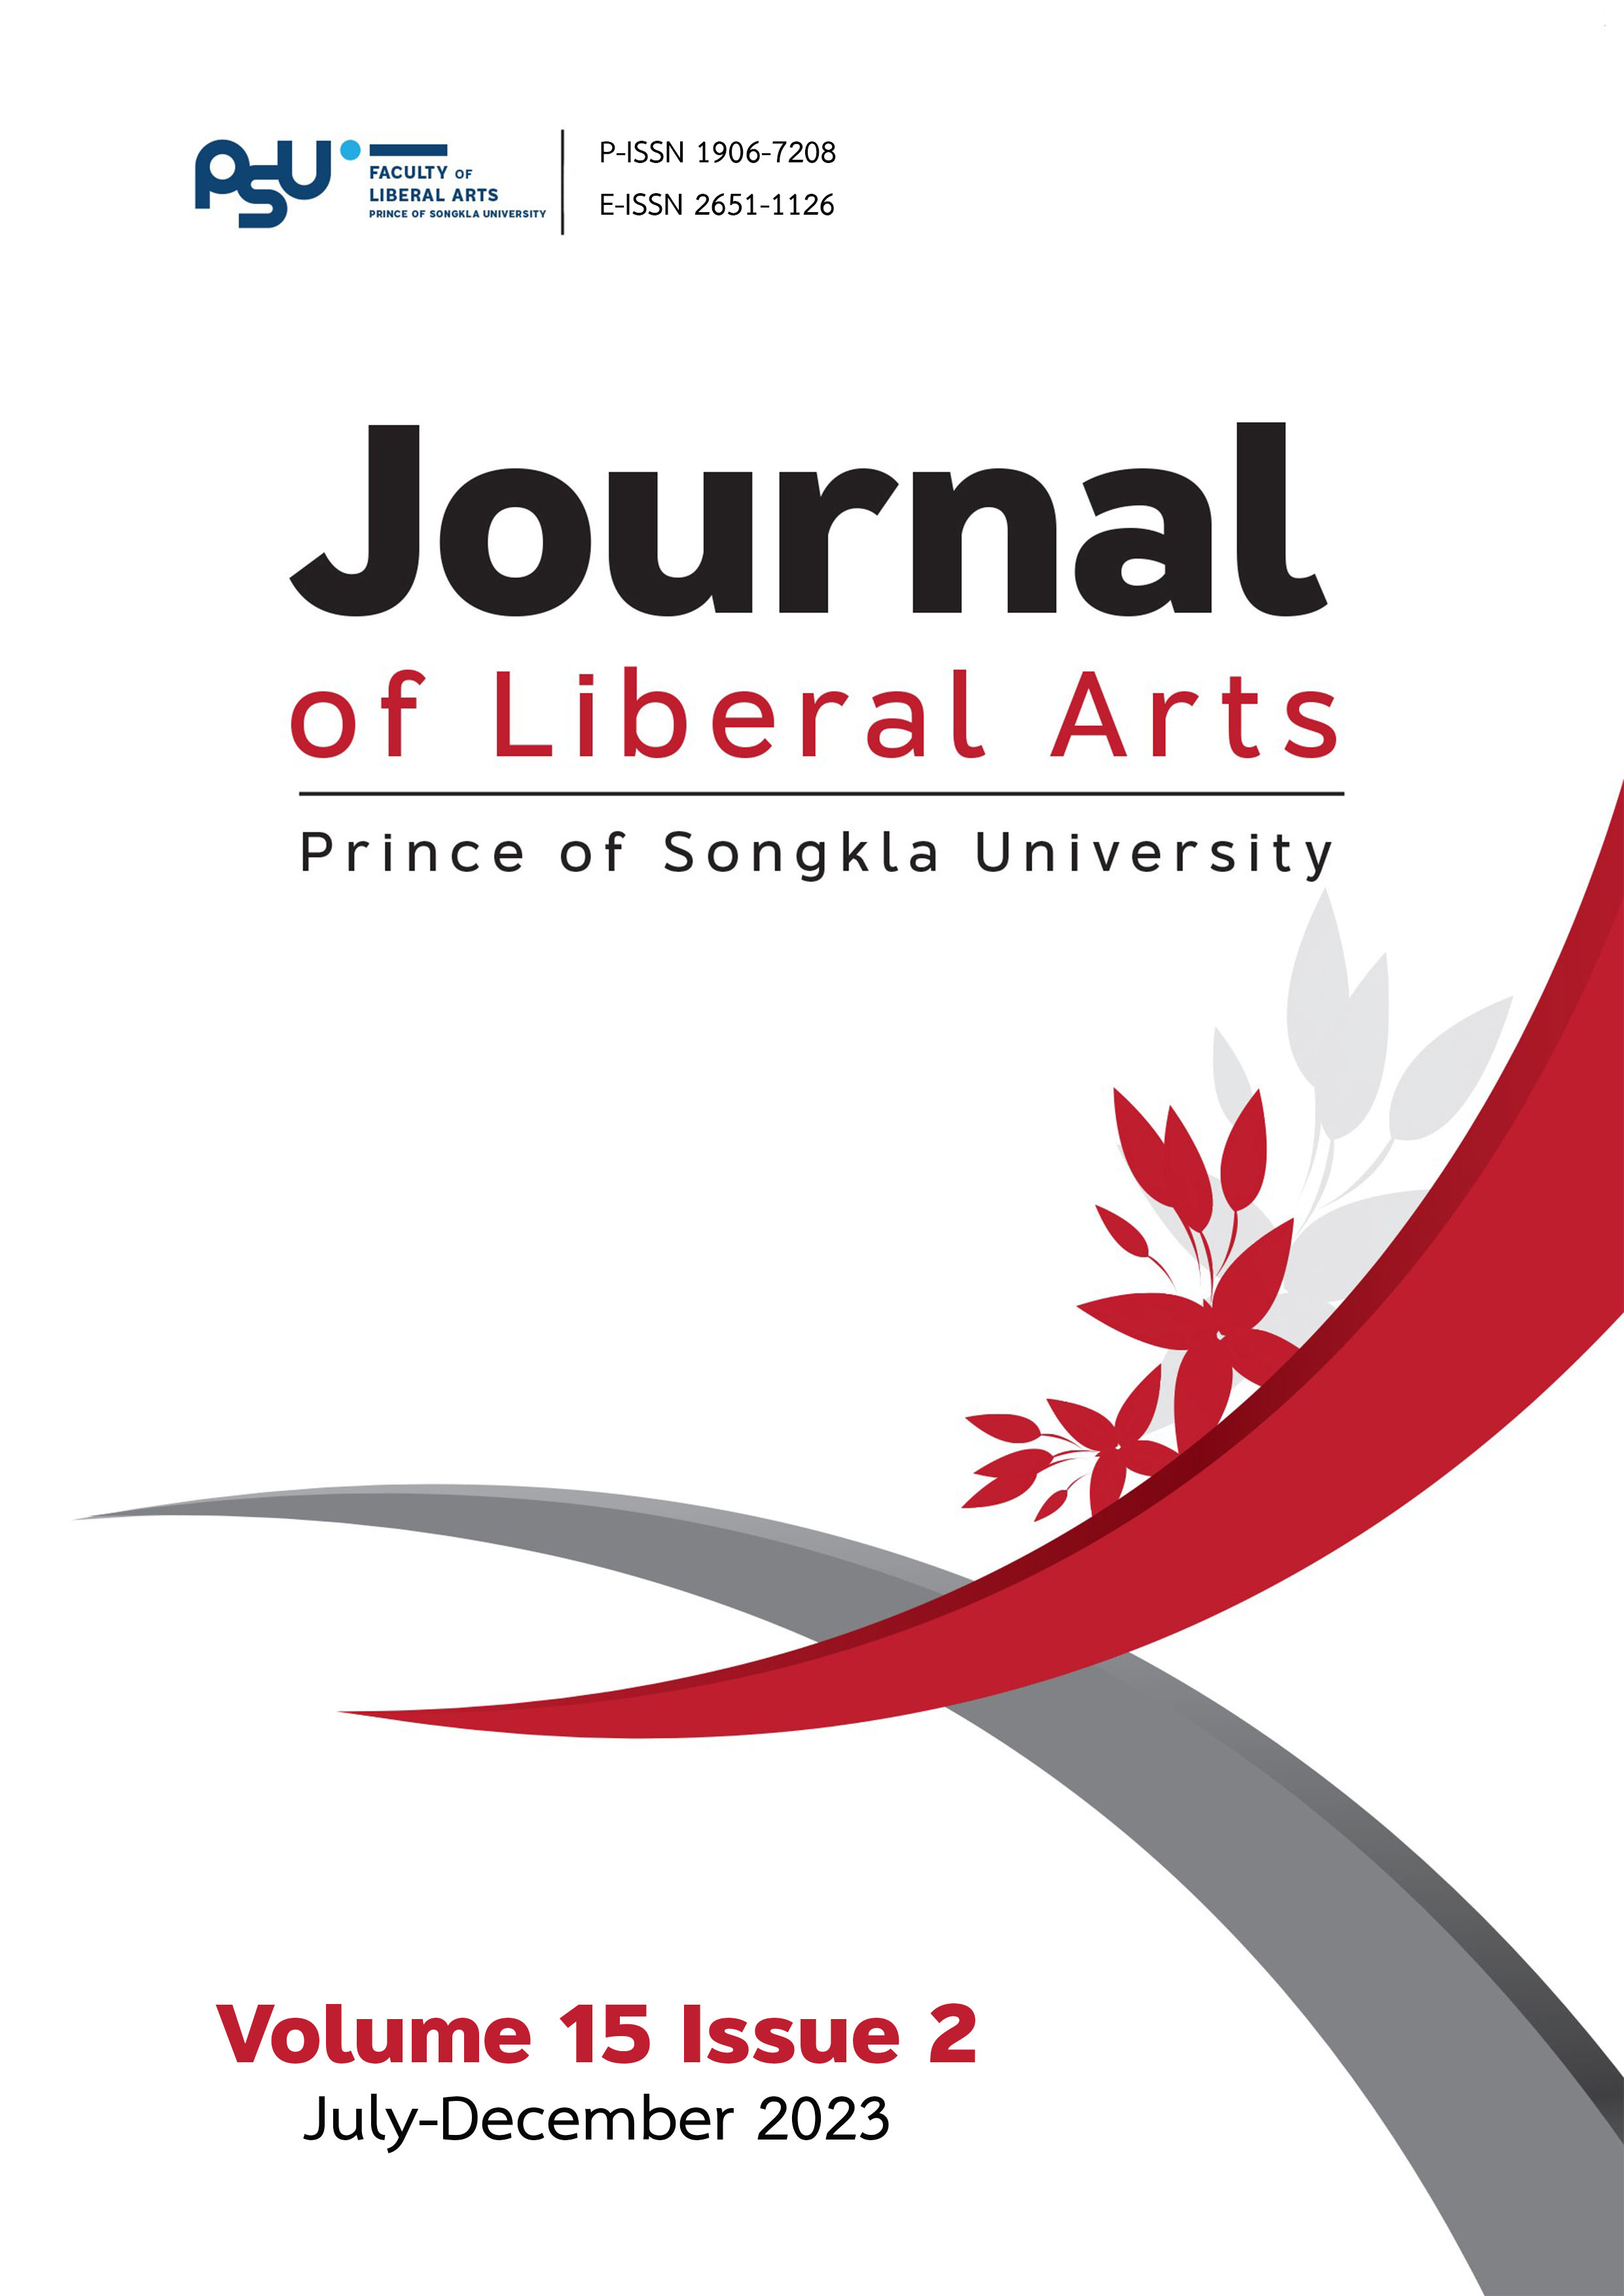 					View Vol. 15 No. 2 (2023): Journal of Liberal Arts, Prince of Songkla University (In process)
				